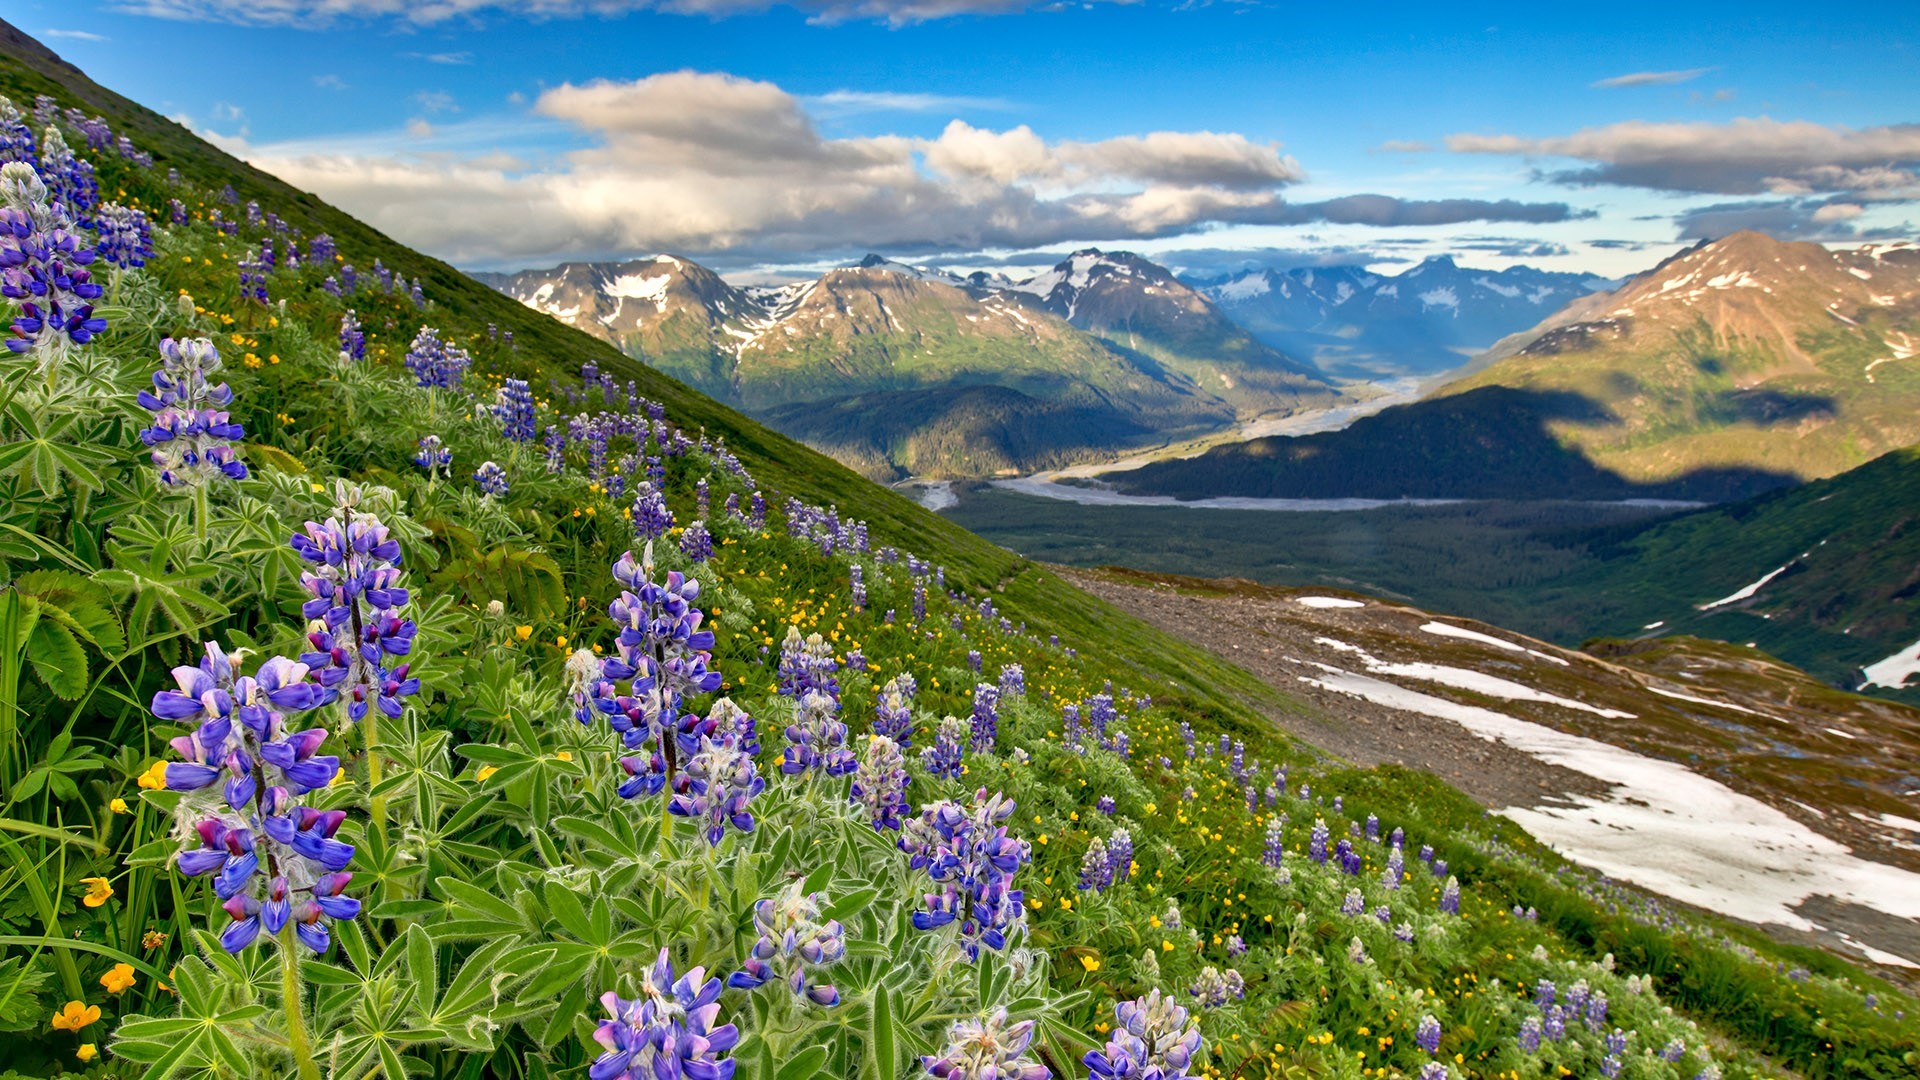 nature, landscape, mountains, river, flowers, purple flowers, spring, rocks, USA, Alaska, sky, fjord, valley, clouds Gallery HD Wallpaper